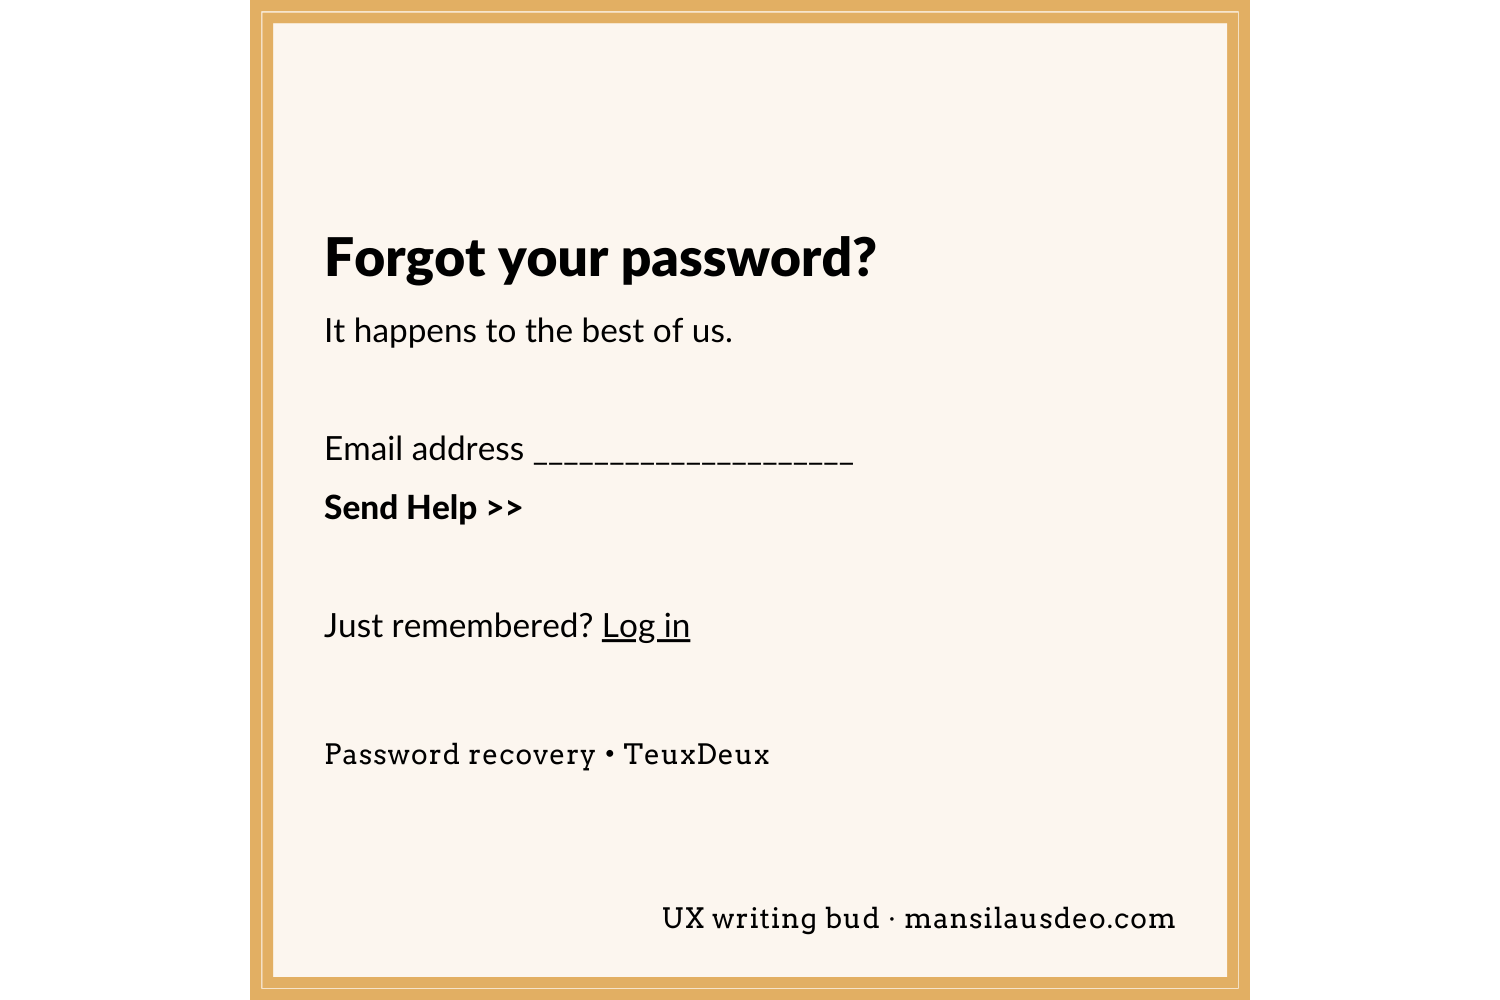 Forgot your password? It happens to the best of us. Email ______________ Send help >> Just remembered? Log in Password recovery • TeuxDeux After clicking on Send Help - Help is on the way! Check your email for instructions to reset your password. UX writing bud